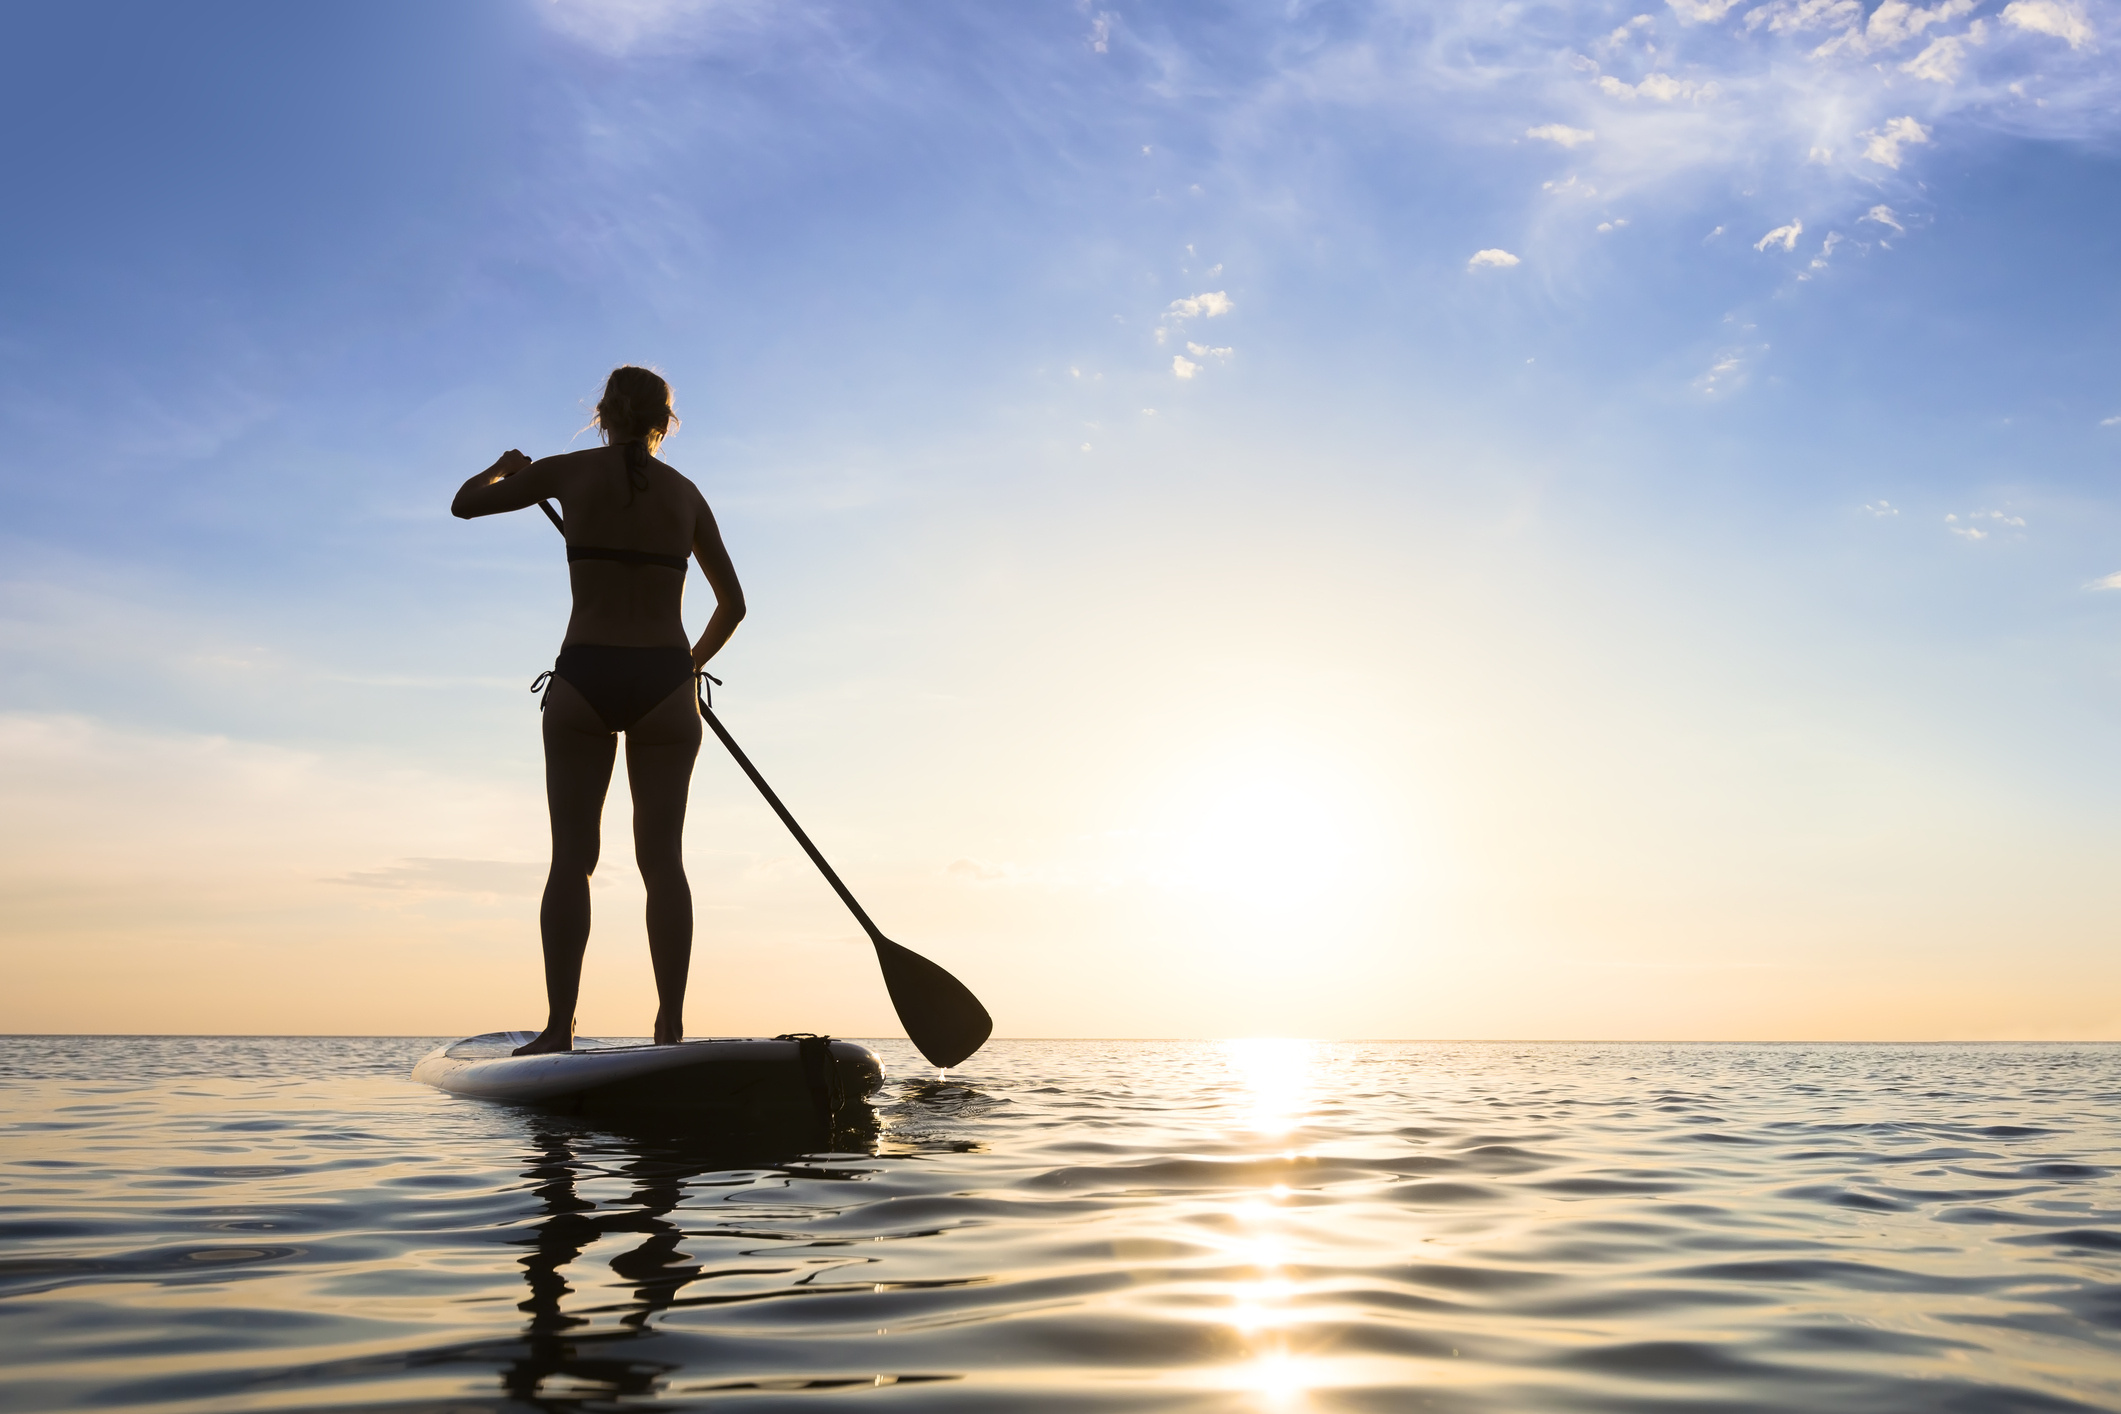 Paddleboard for fitness, Physical therapy, Health benefits, Self-improvement, 2130x1420 HD Desktop